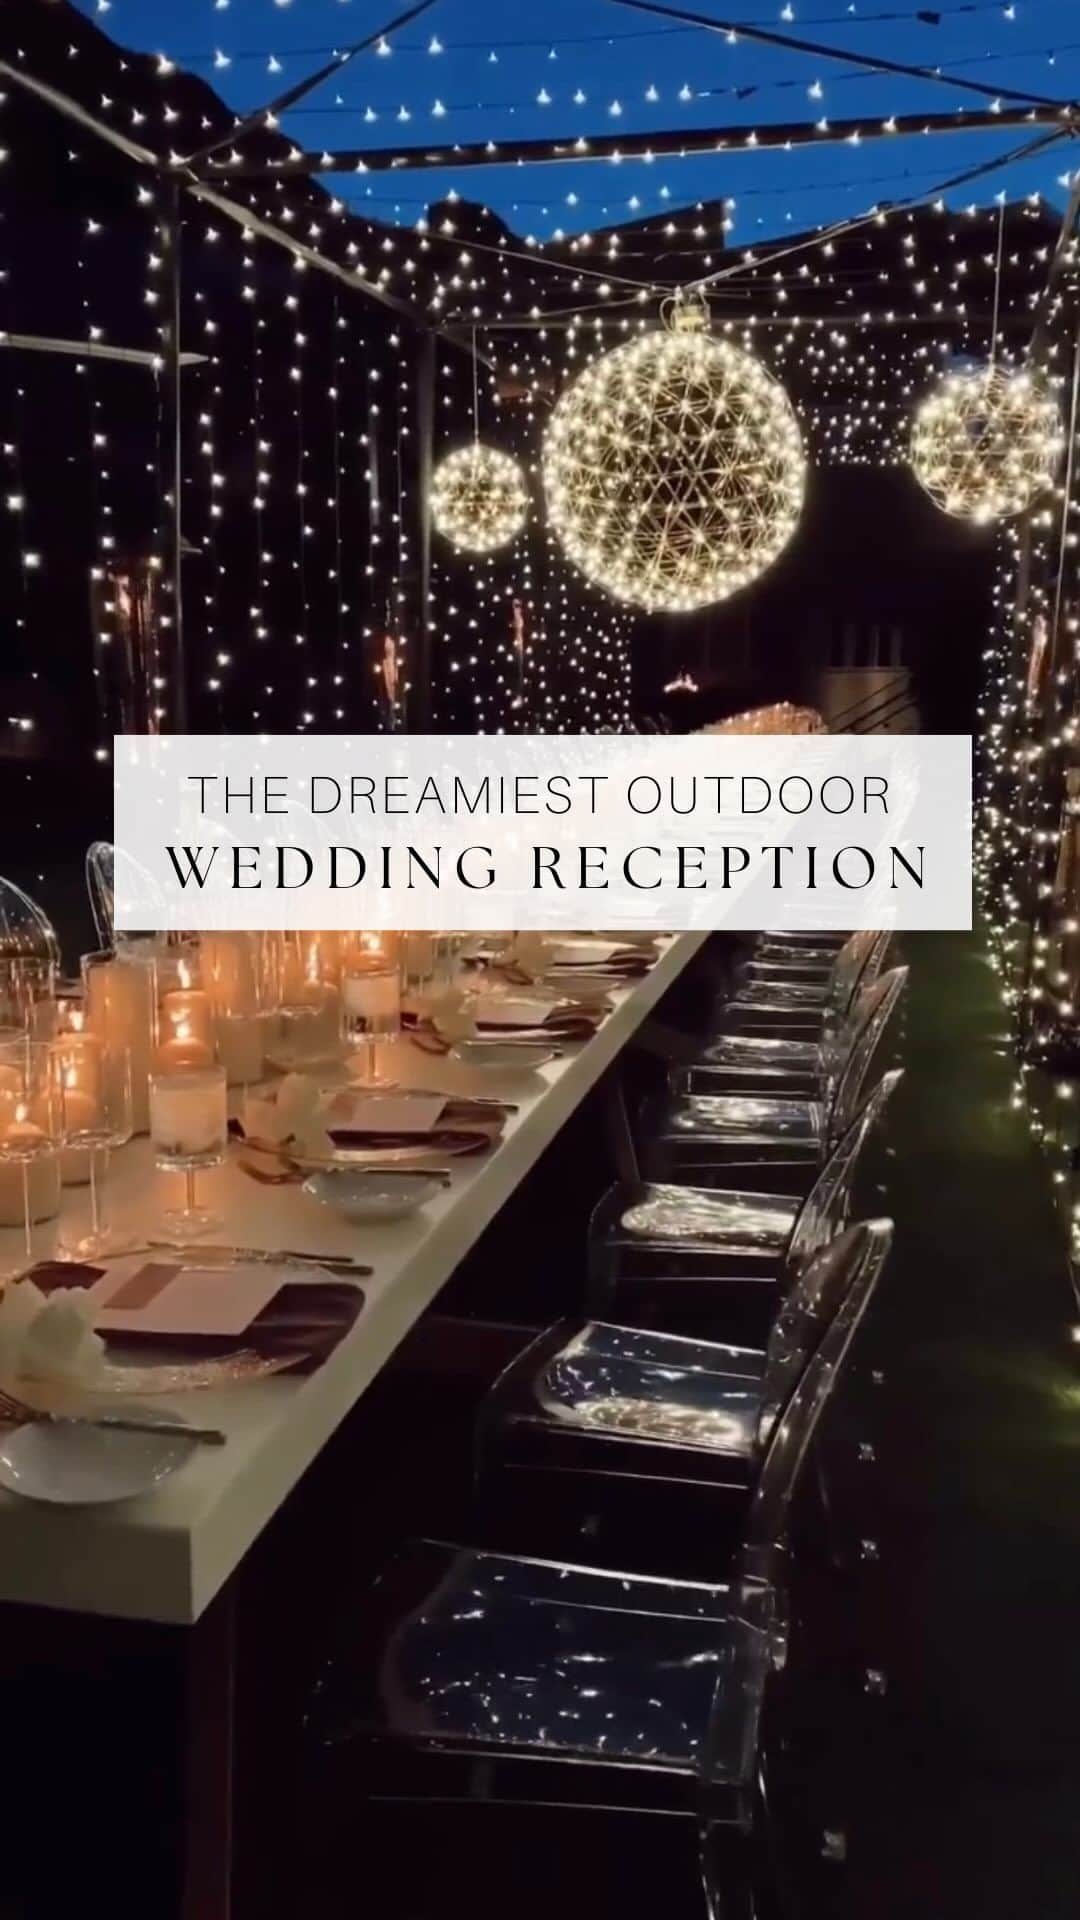 WEDDING APPARELのインスタグラム：「Wedding theme: Starry night ✨  Wait for the dreamiest day-to-night wedding reception transformation, which will have you in awe! Are you incorporating twinkle lights into your big day? Let us know in the comments below👇  Planner: @luxurybybts_  #luxurywedding #luxuryweddings #luxuryweddingdecor #weddingdecor #weddingdesign #weddingreception #weddingreceptiondecor #twinklelights #romanticwedding #weddingplanning #weddinginspo #outdoorweddingreception #weddingideas #weddingday #summerwedding #weddinginspiration #weddingwednesday #weddingdecor #weddingdecoration #gardeninspo #dreamwedding #beforeandafter #weddingtransformation」